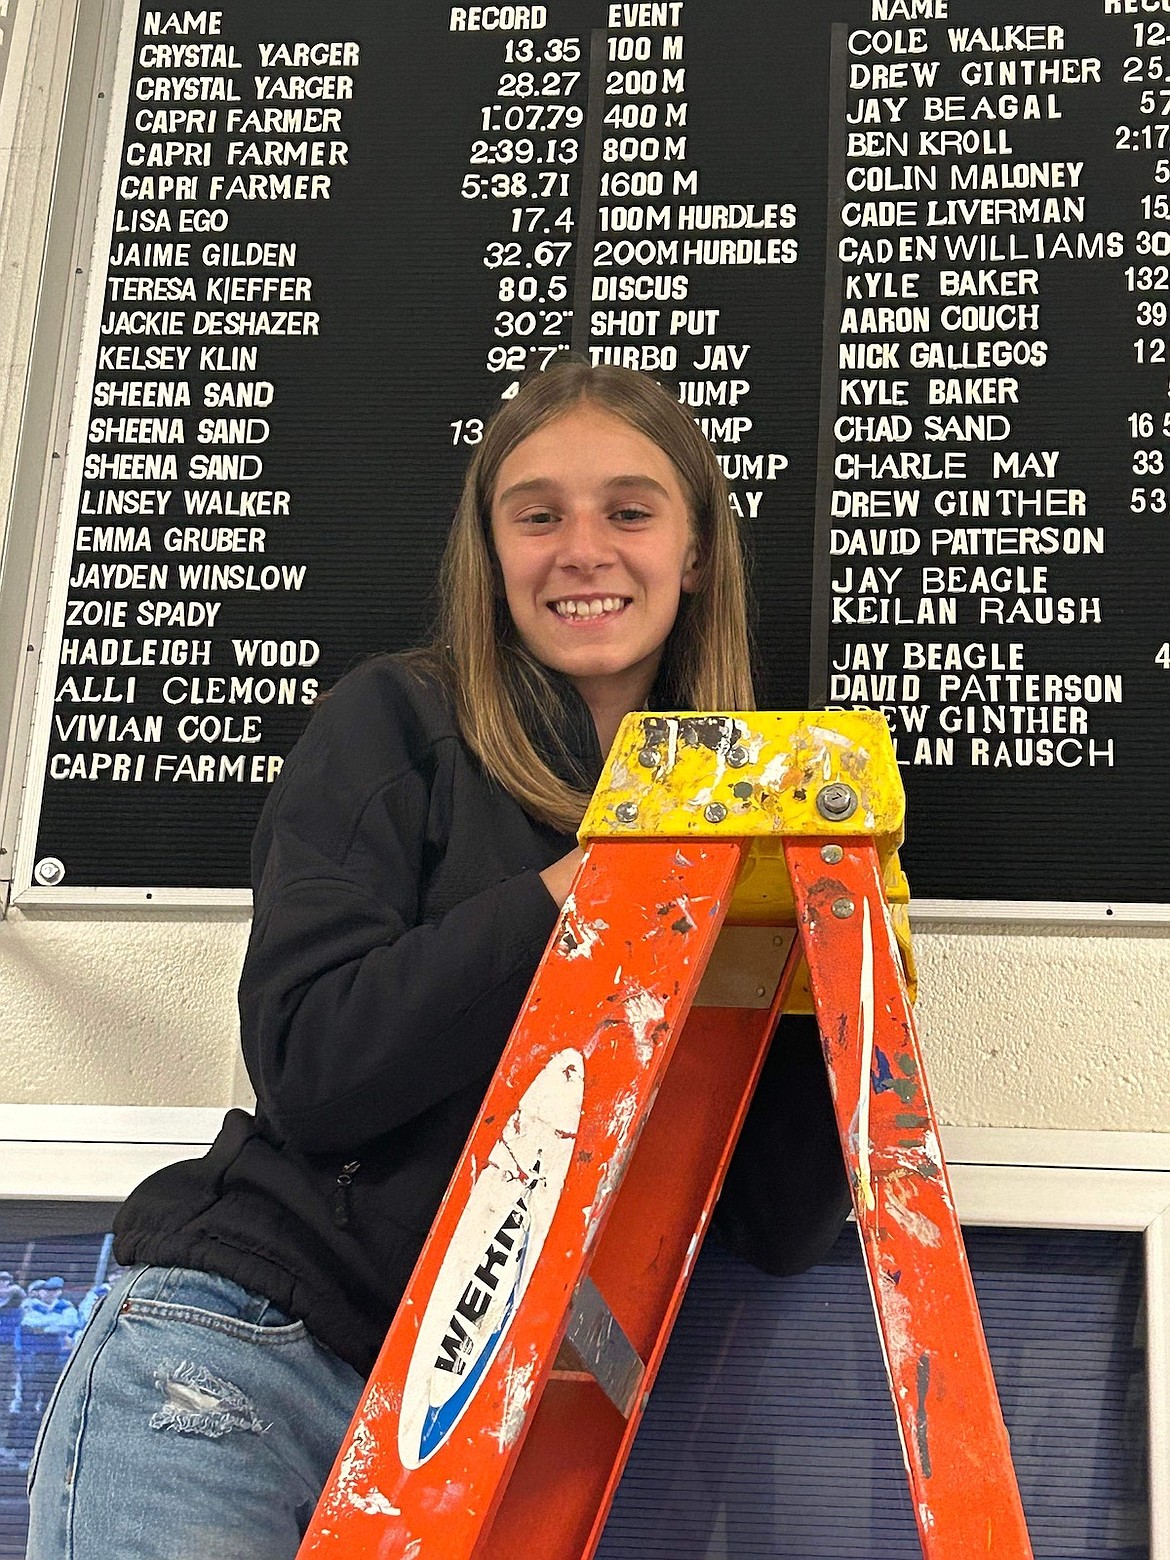 Libby track and field performer Capri Farmer broke three individual records and was part of the 4x400 relay team that also set a new school mark for seventh-grade students. (Photo courtesy Libby Public School)